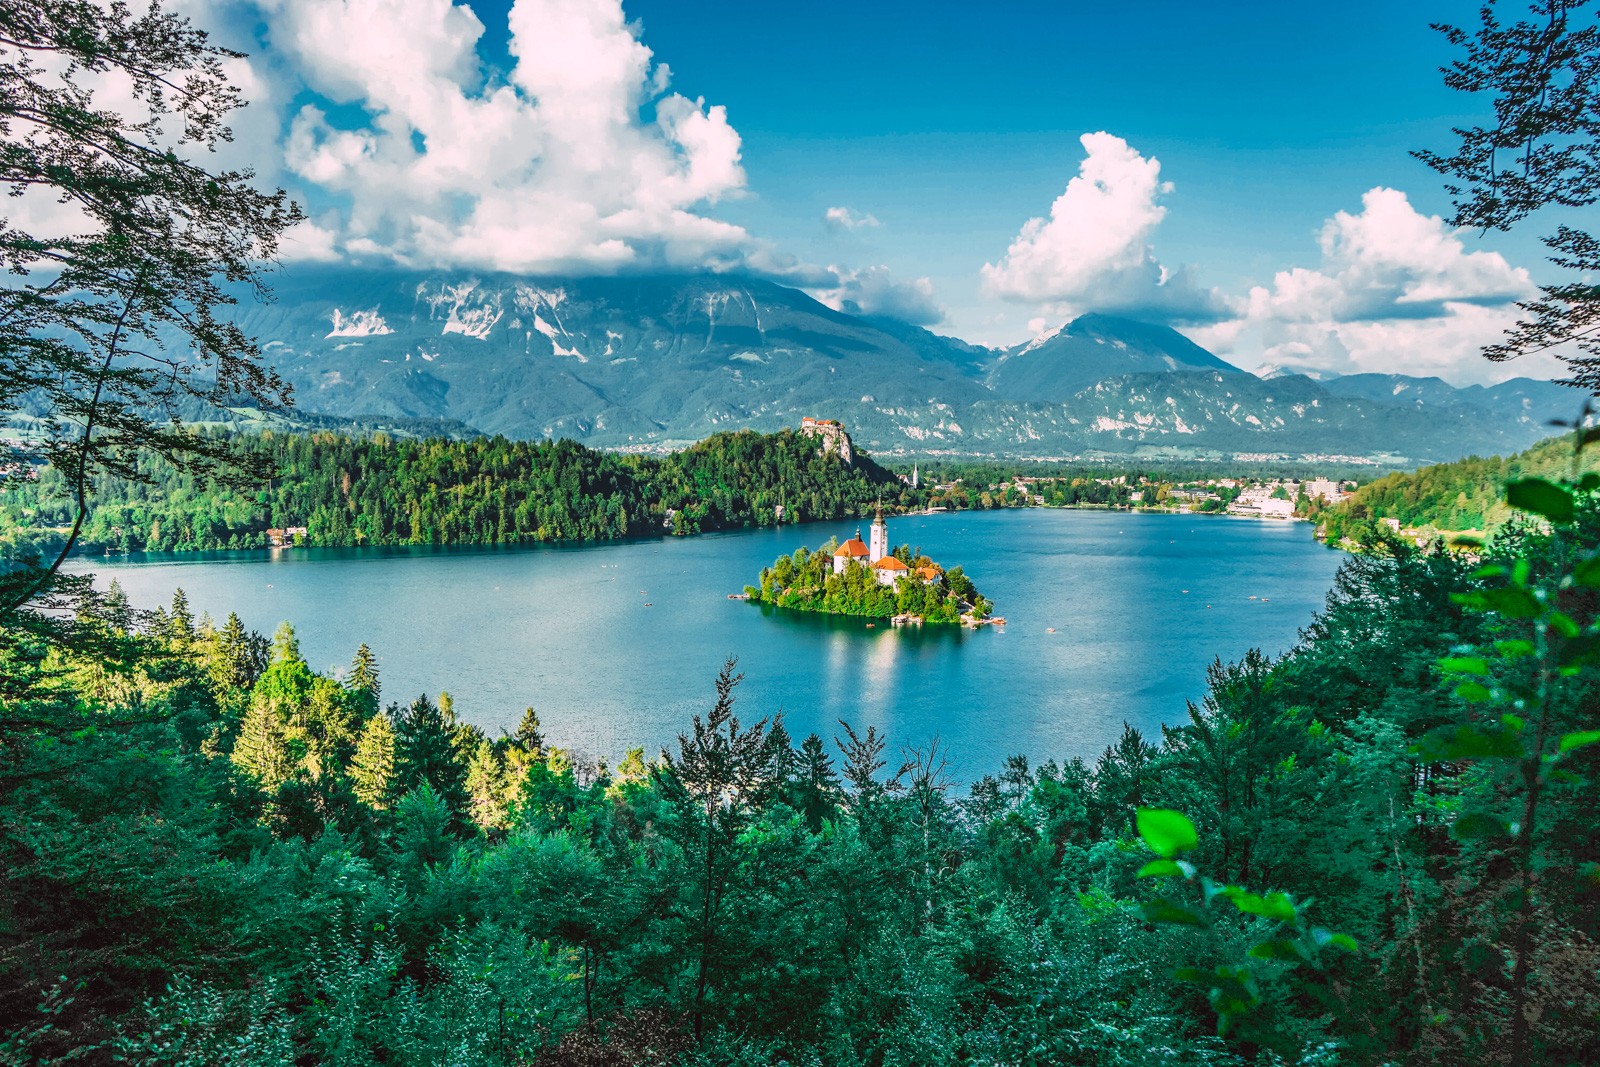 small island in the middle of a lake with a small castle like building on it with surrounding pine covered hills and mountains in the distance with partly cloudy sky